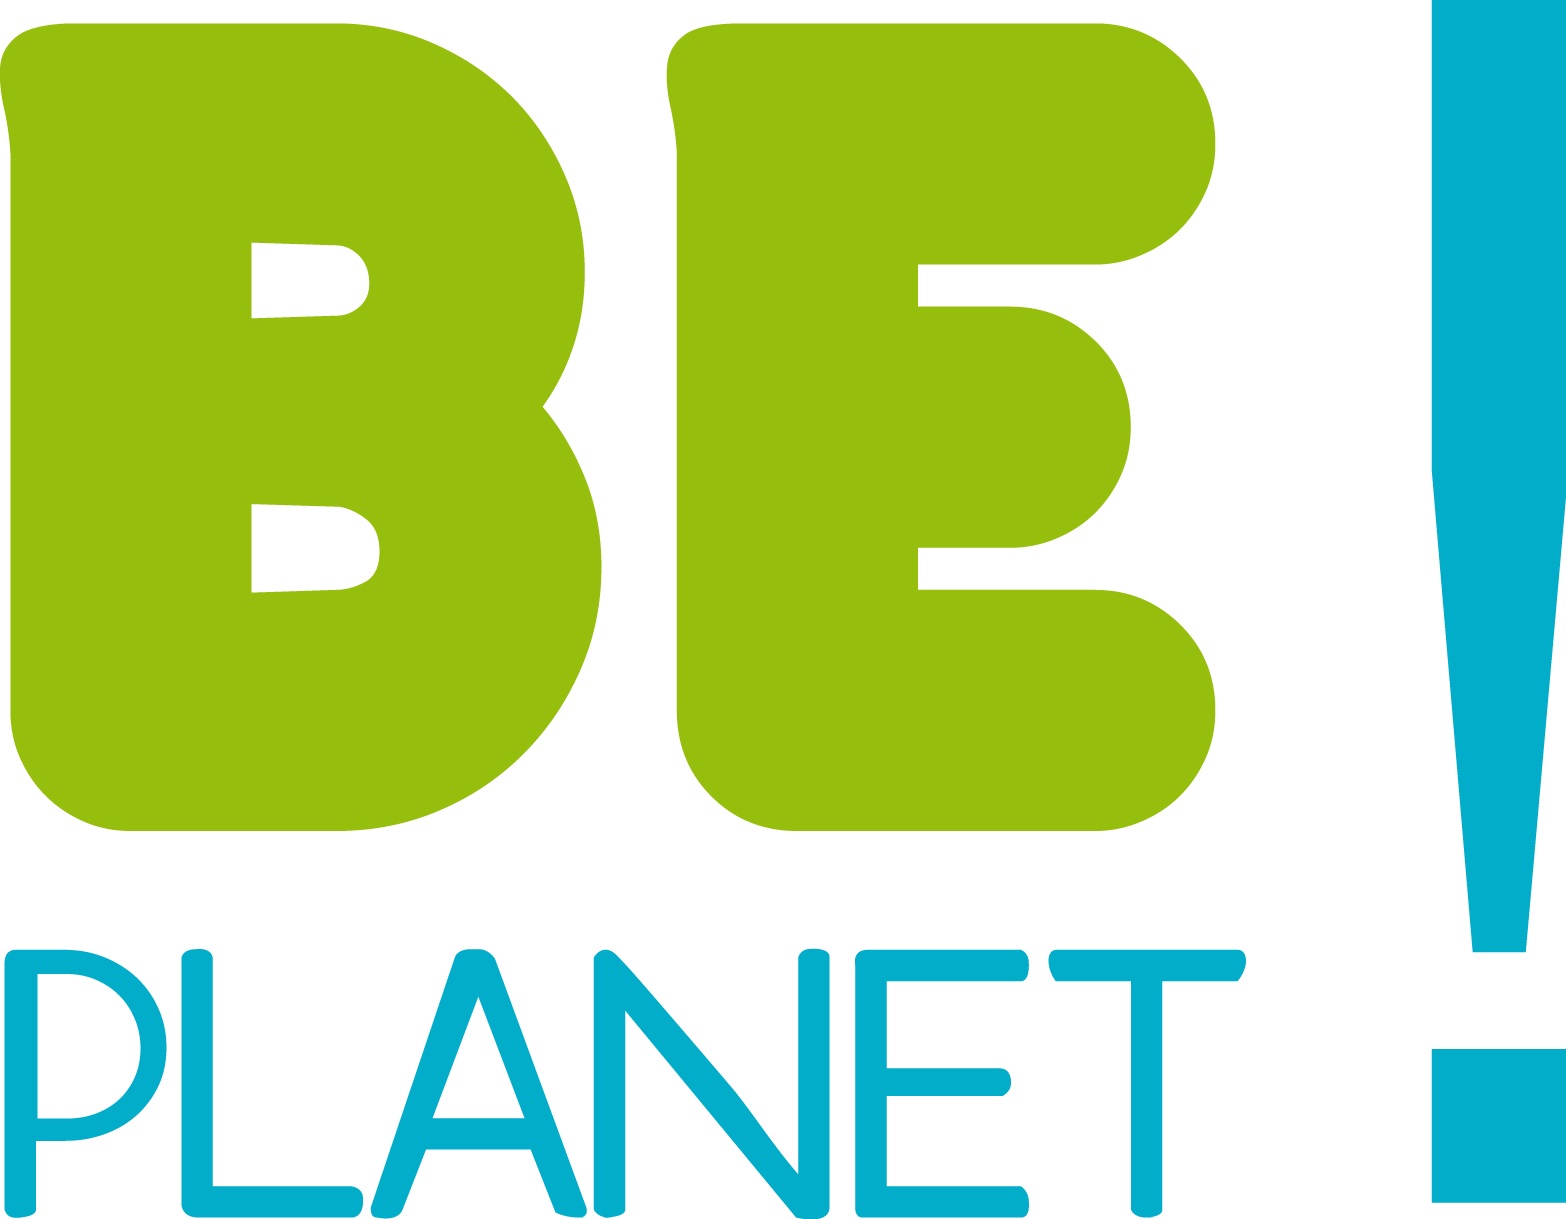 Be Planet